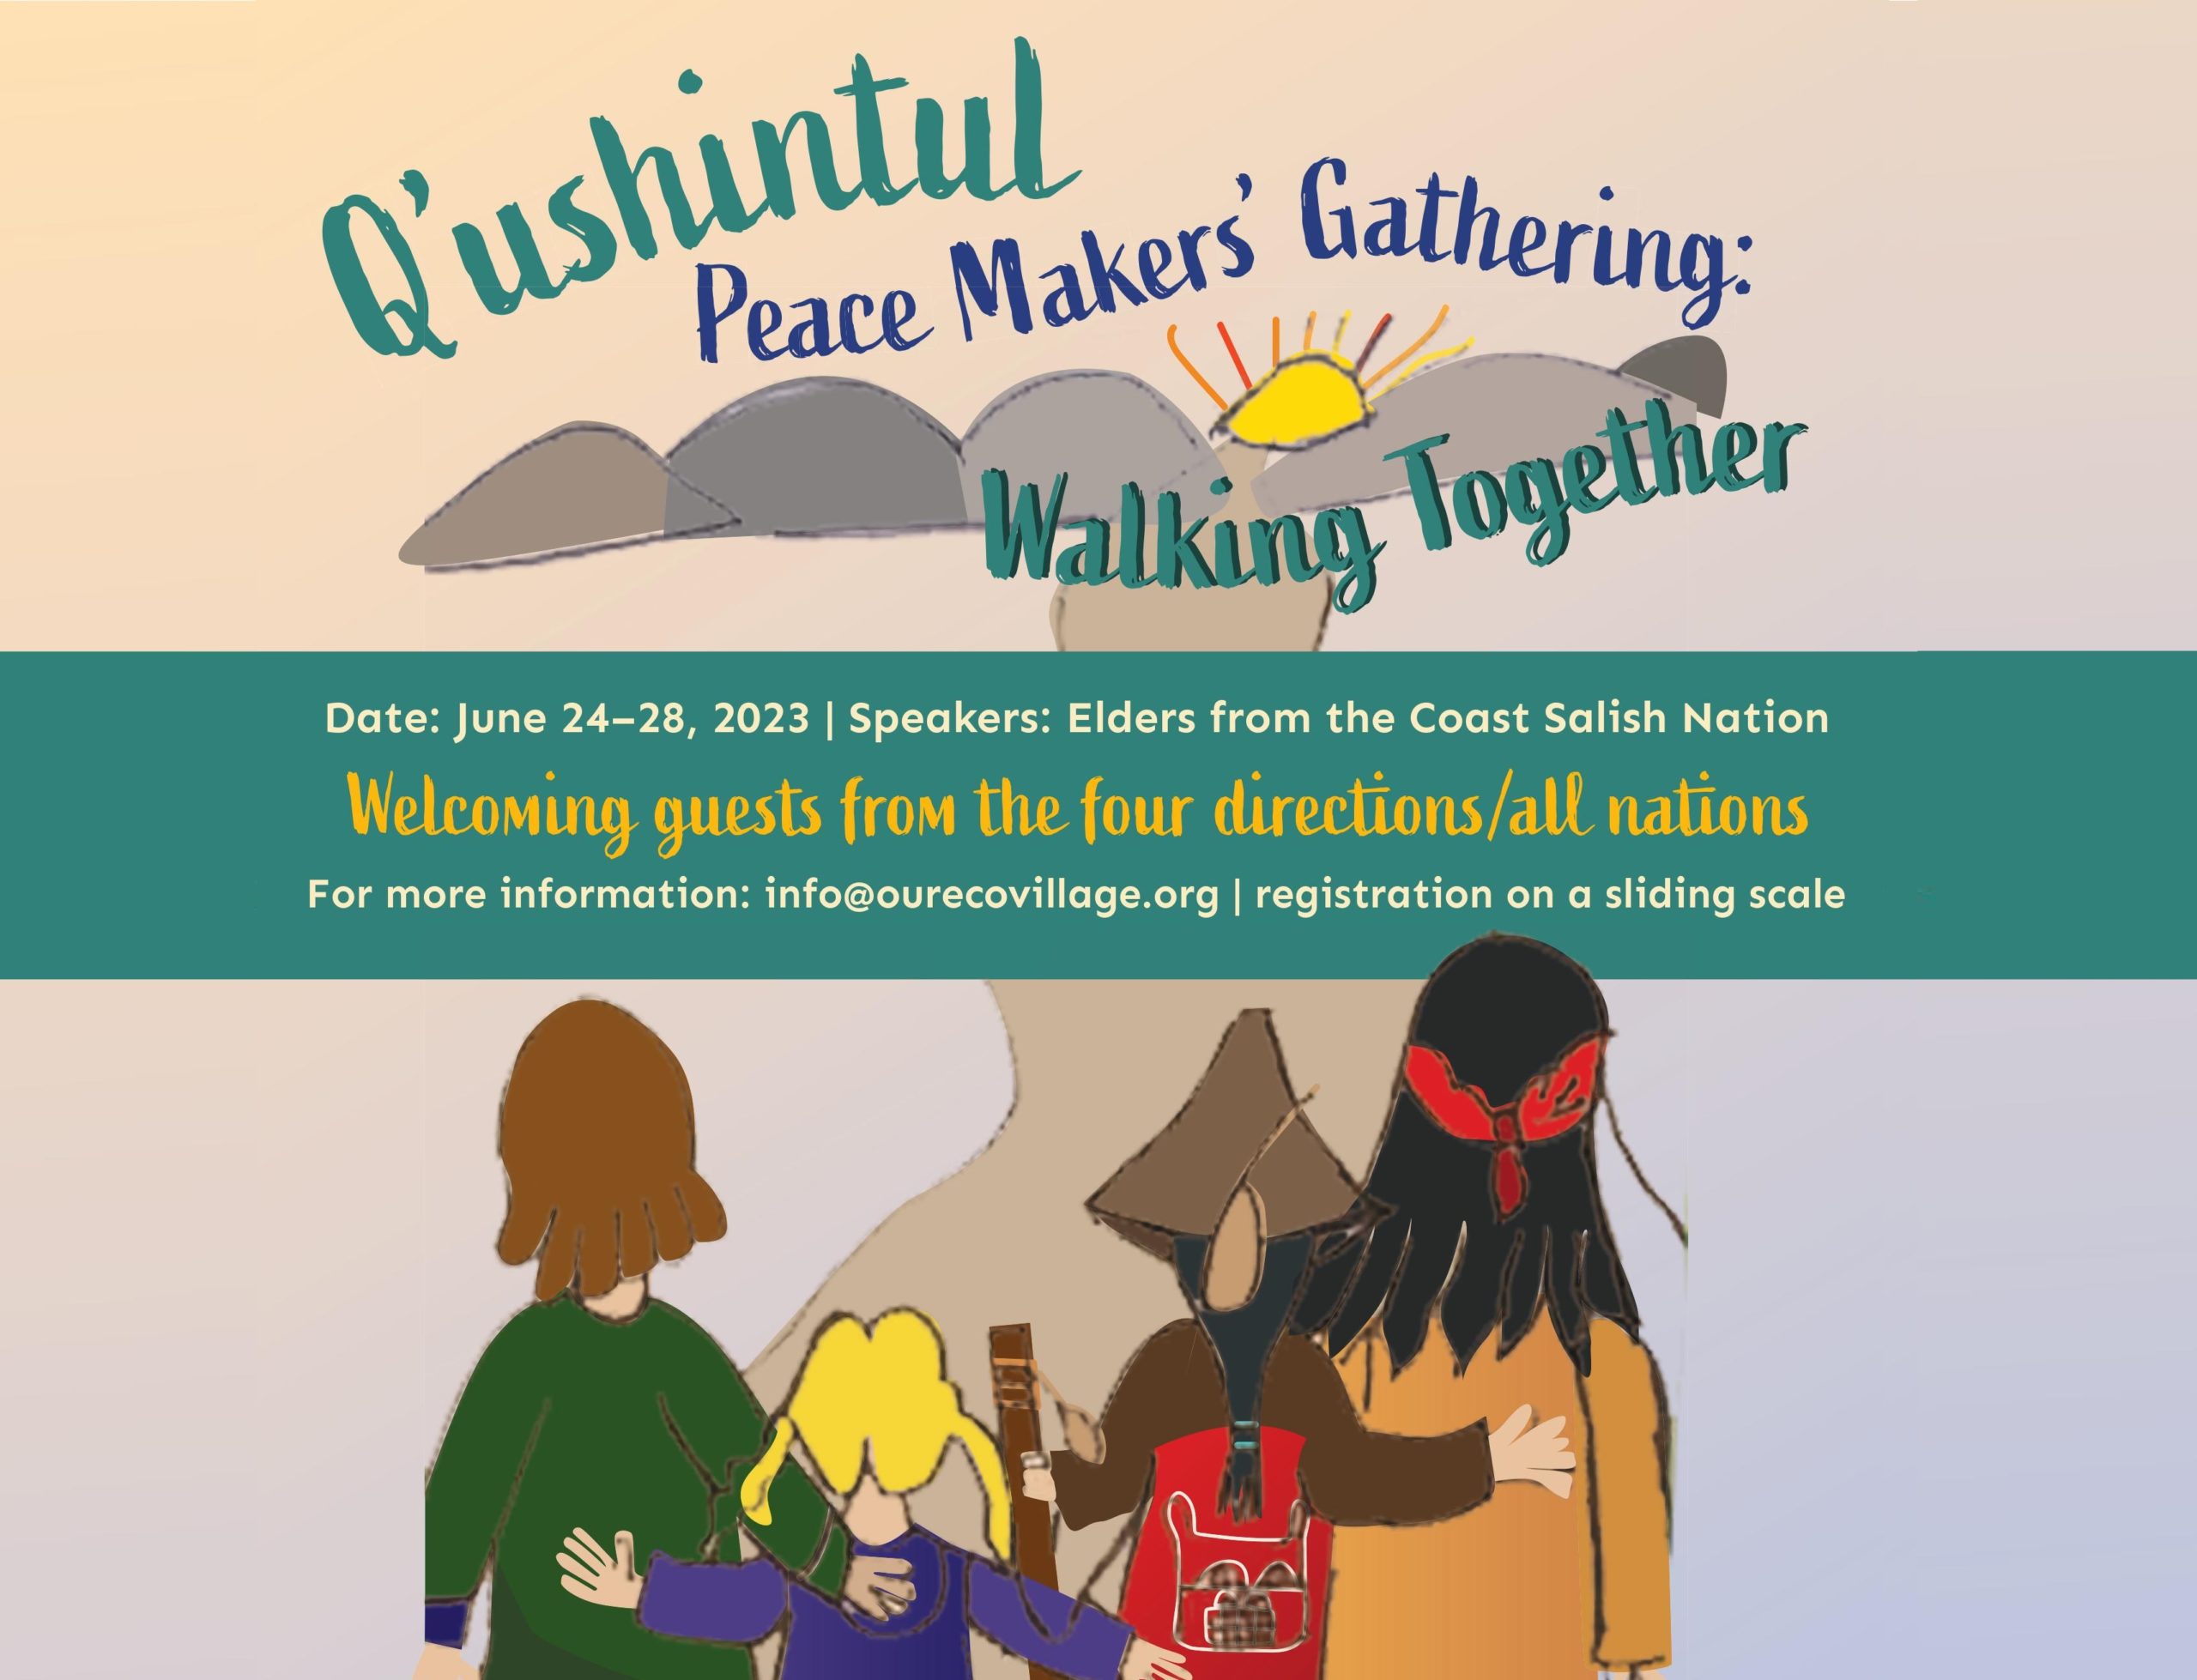 Walking Together Peace Makers Gathering